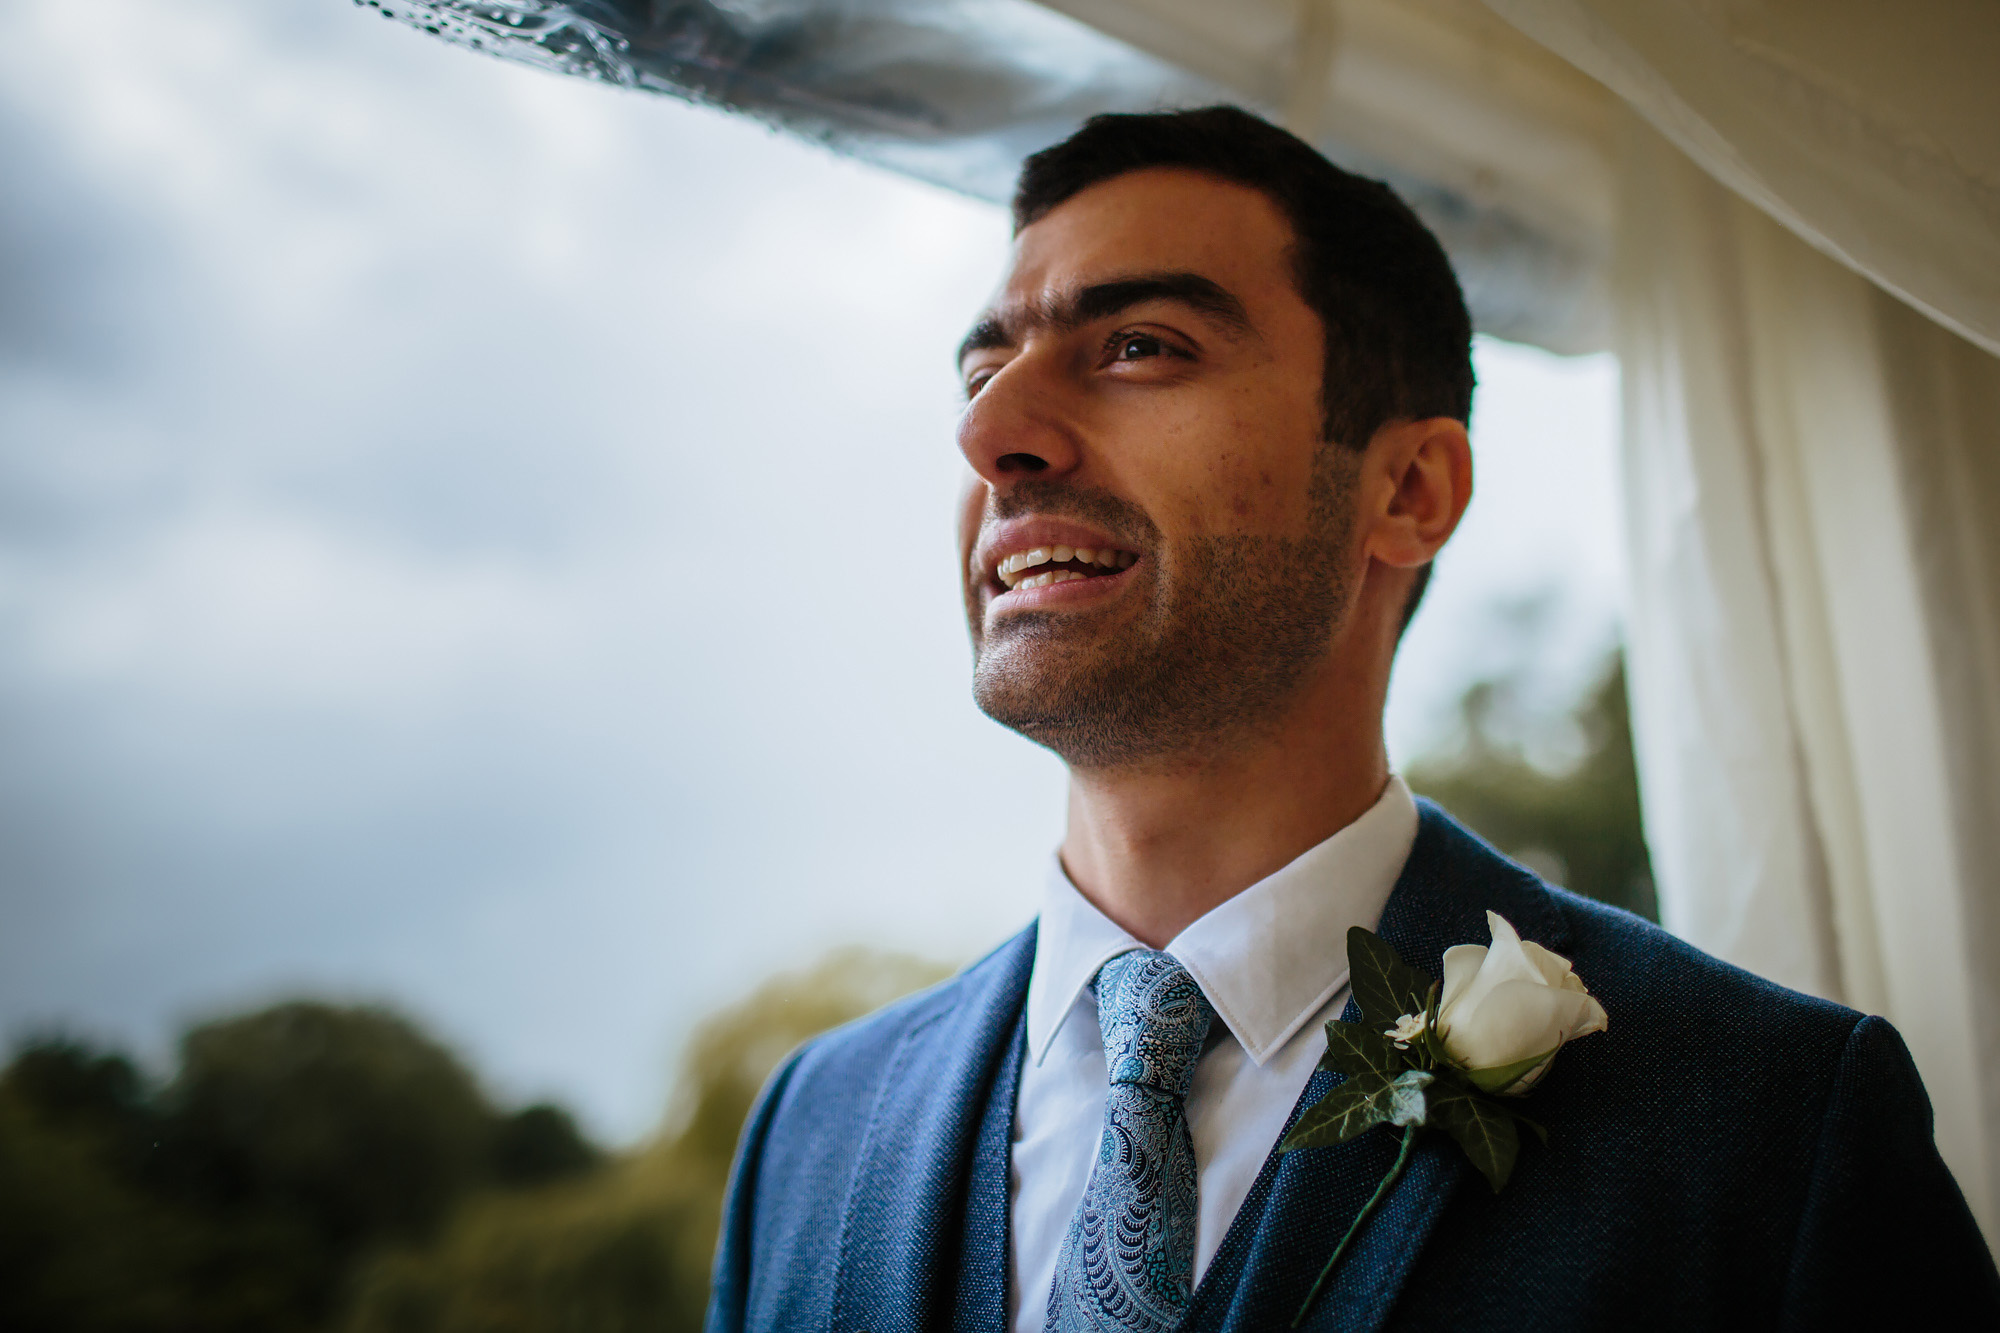 Groom portrait in his suit tie and buttonhole